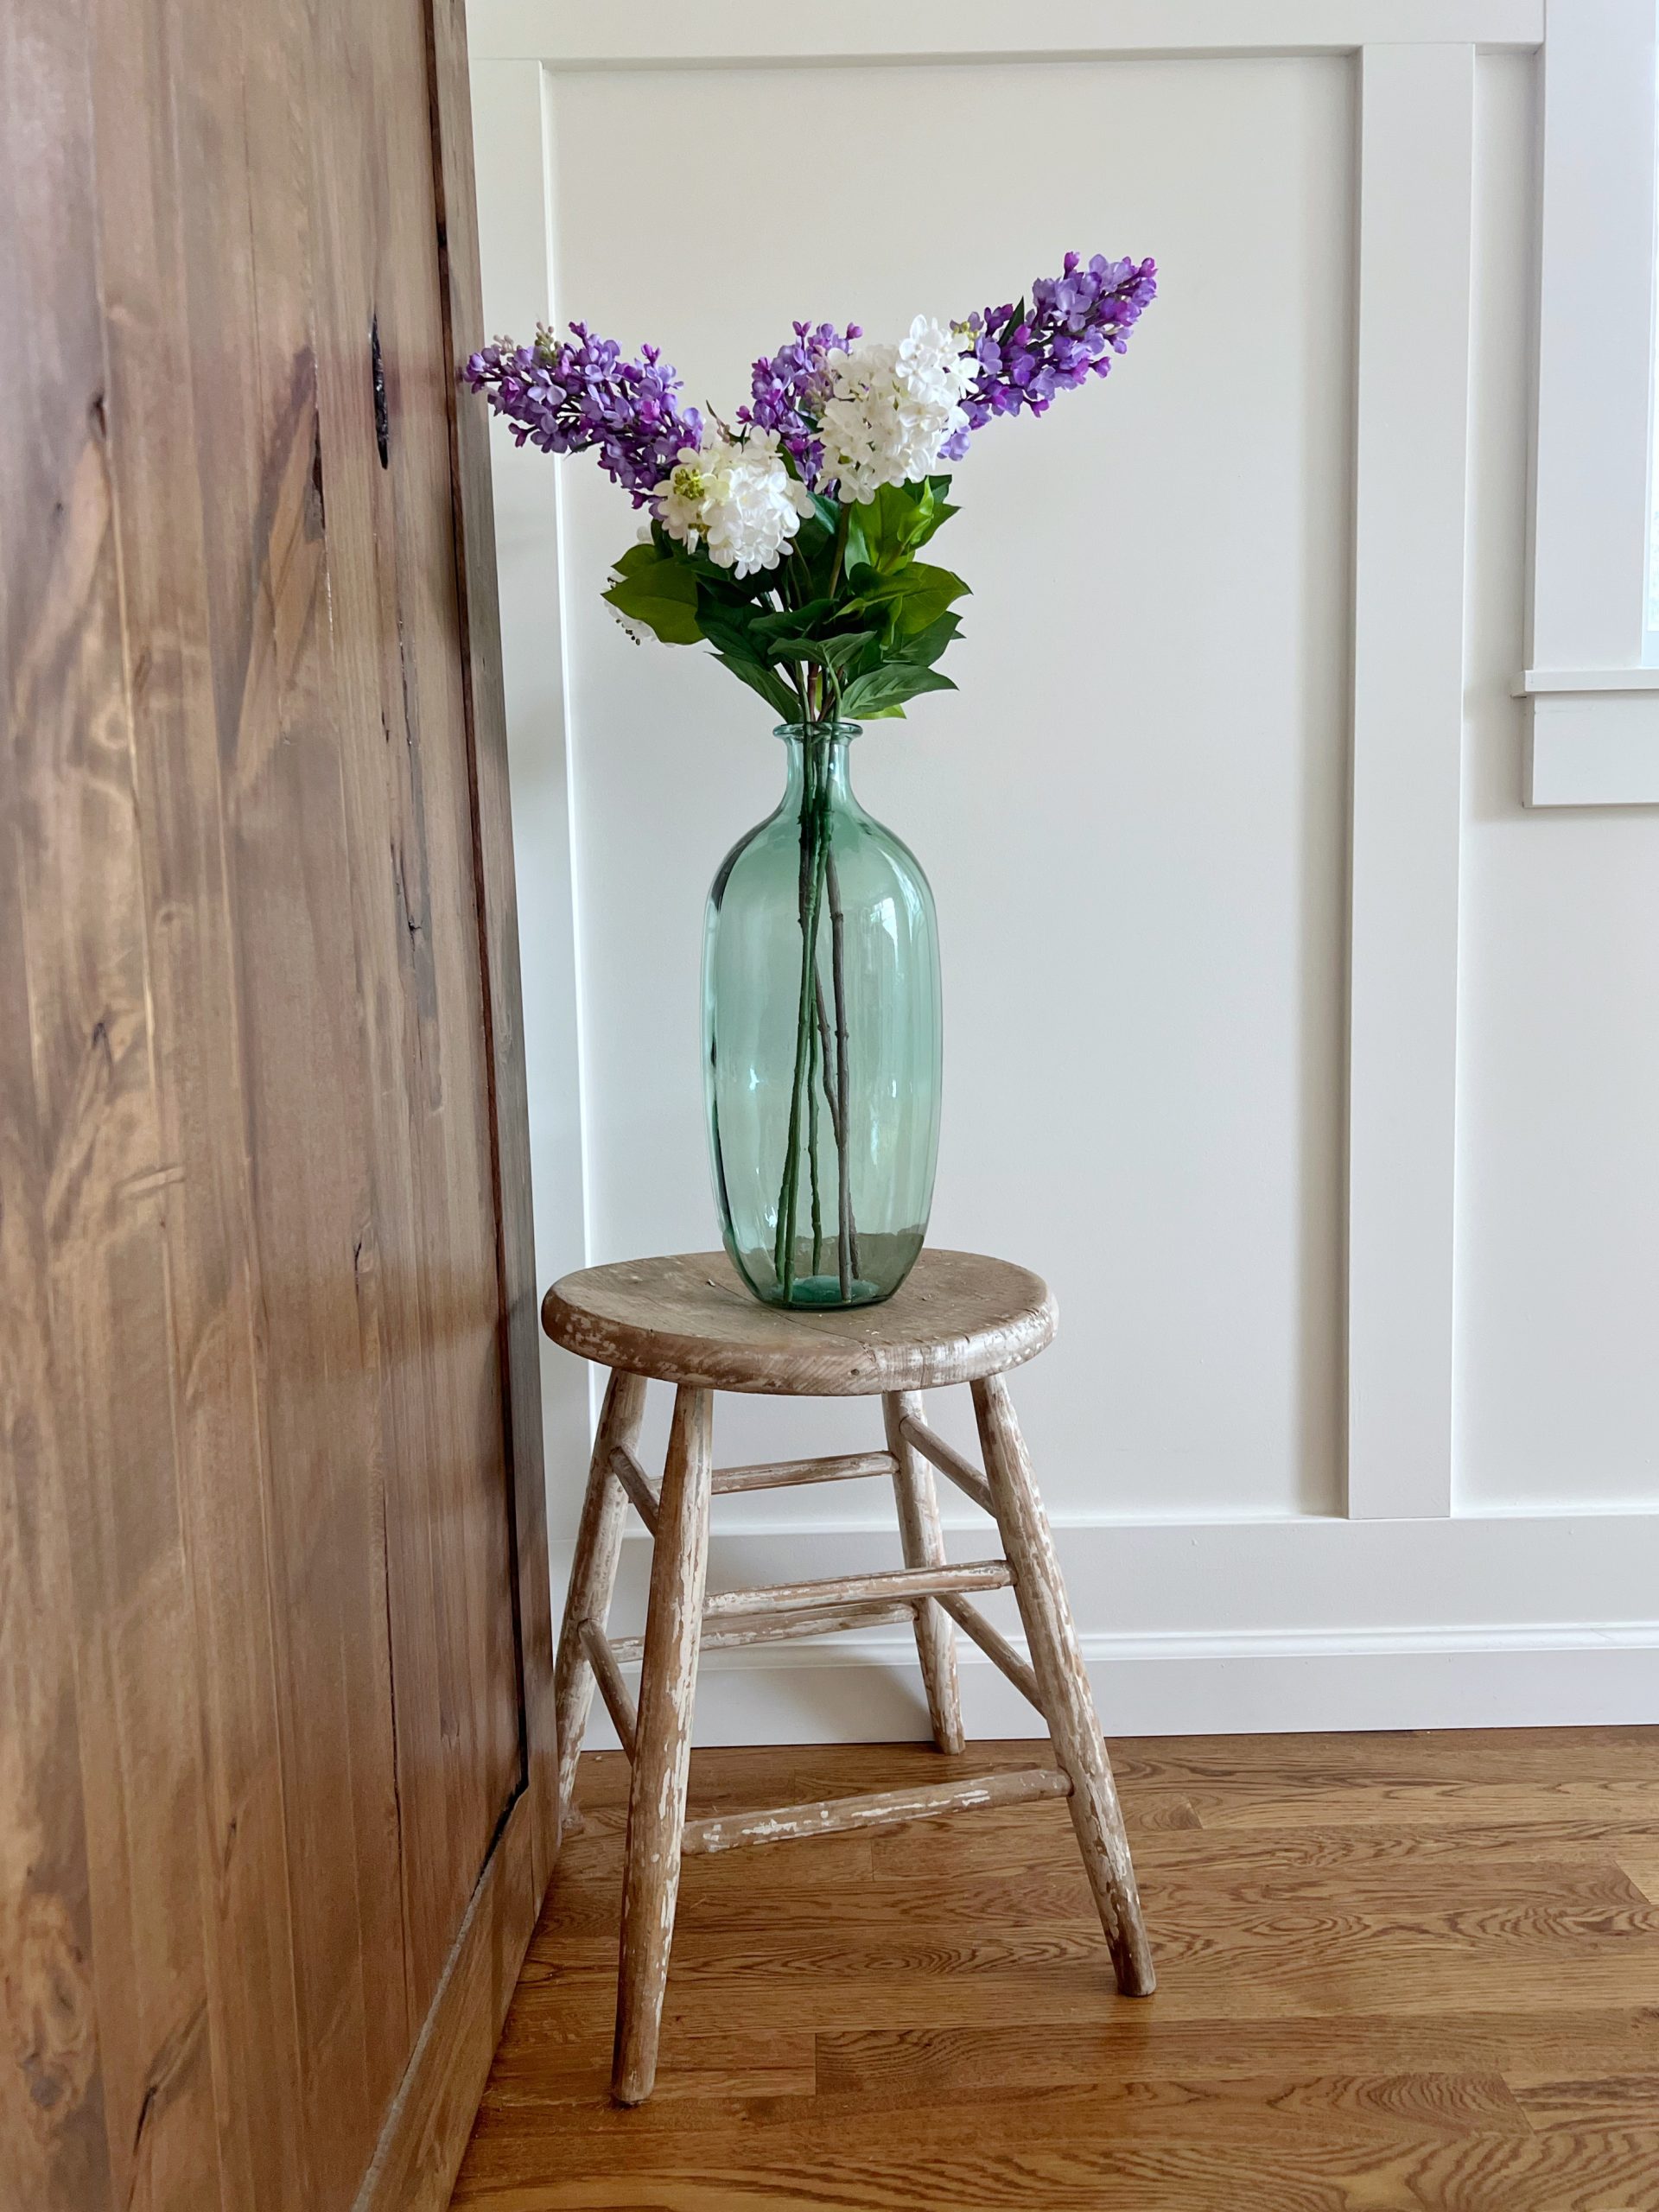 Lilacs in a green glass vase sitting on a round vintage wooden stool.